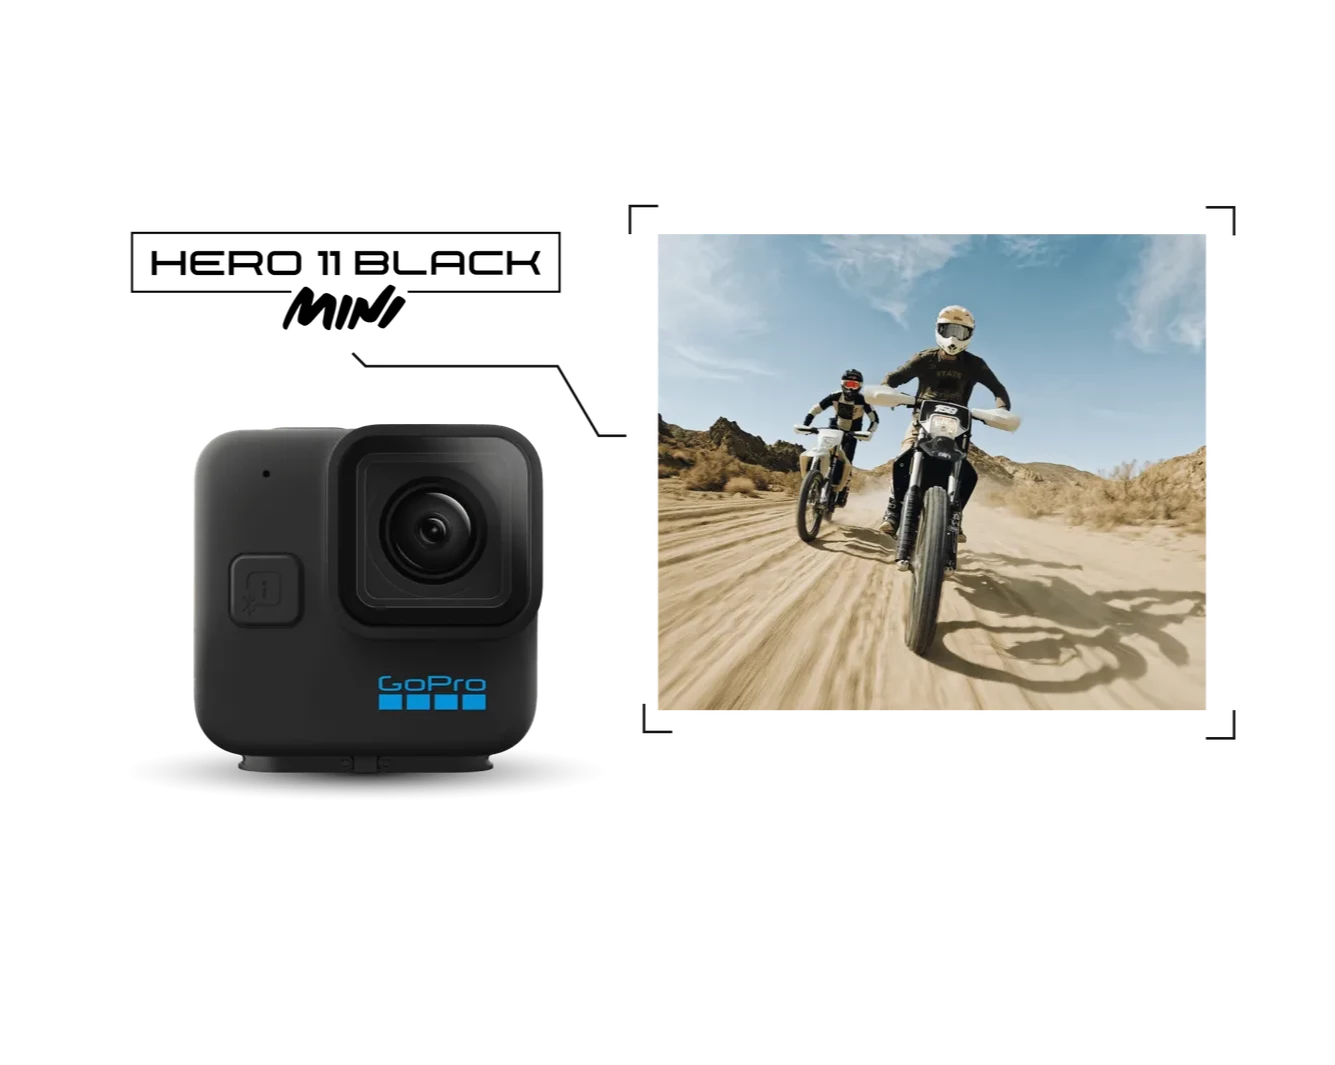 Product photo of the GoPro 11 Black Mini with dirt bikes in the background